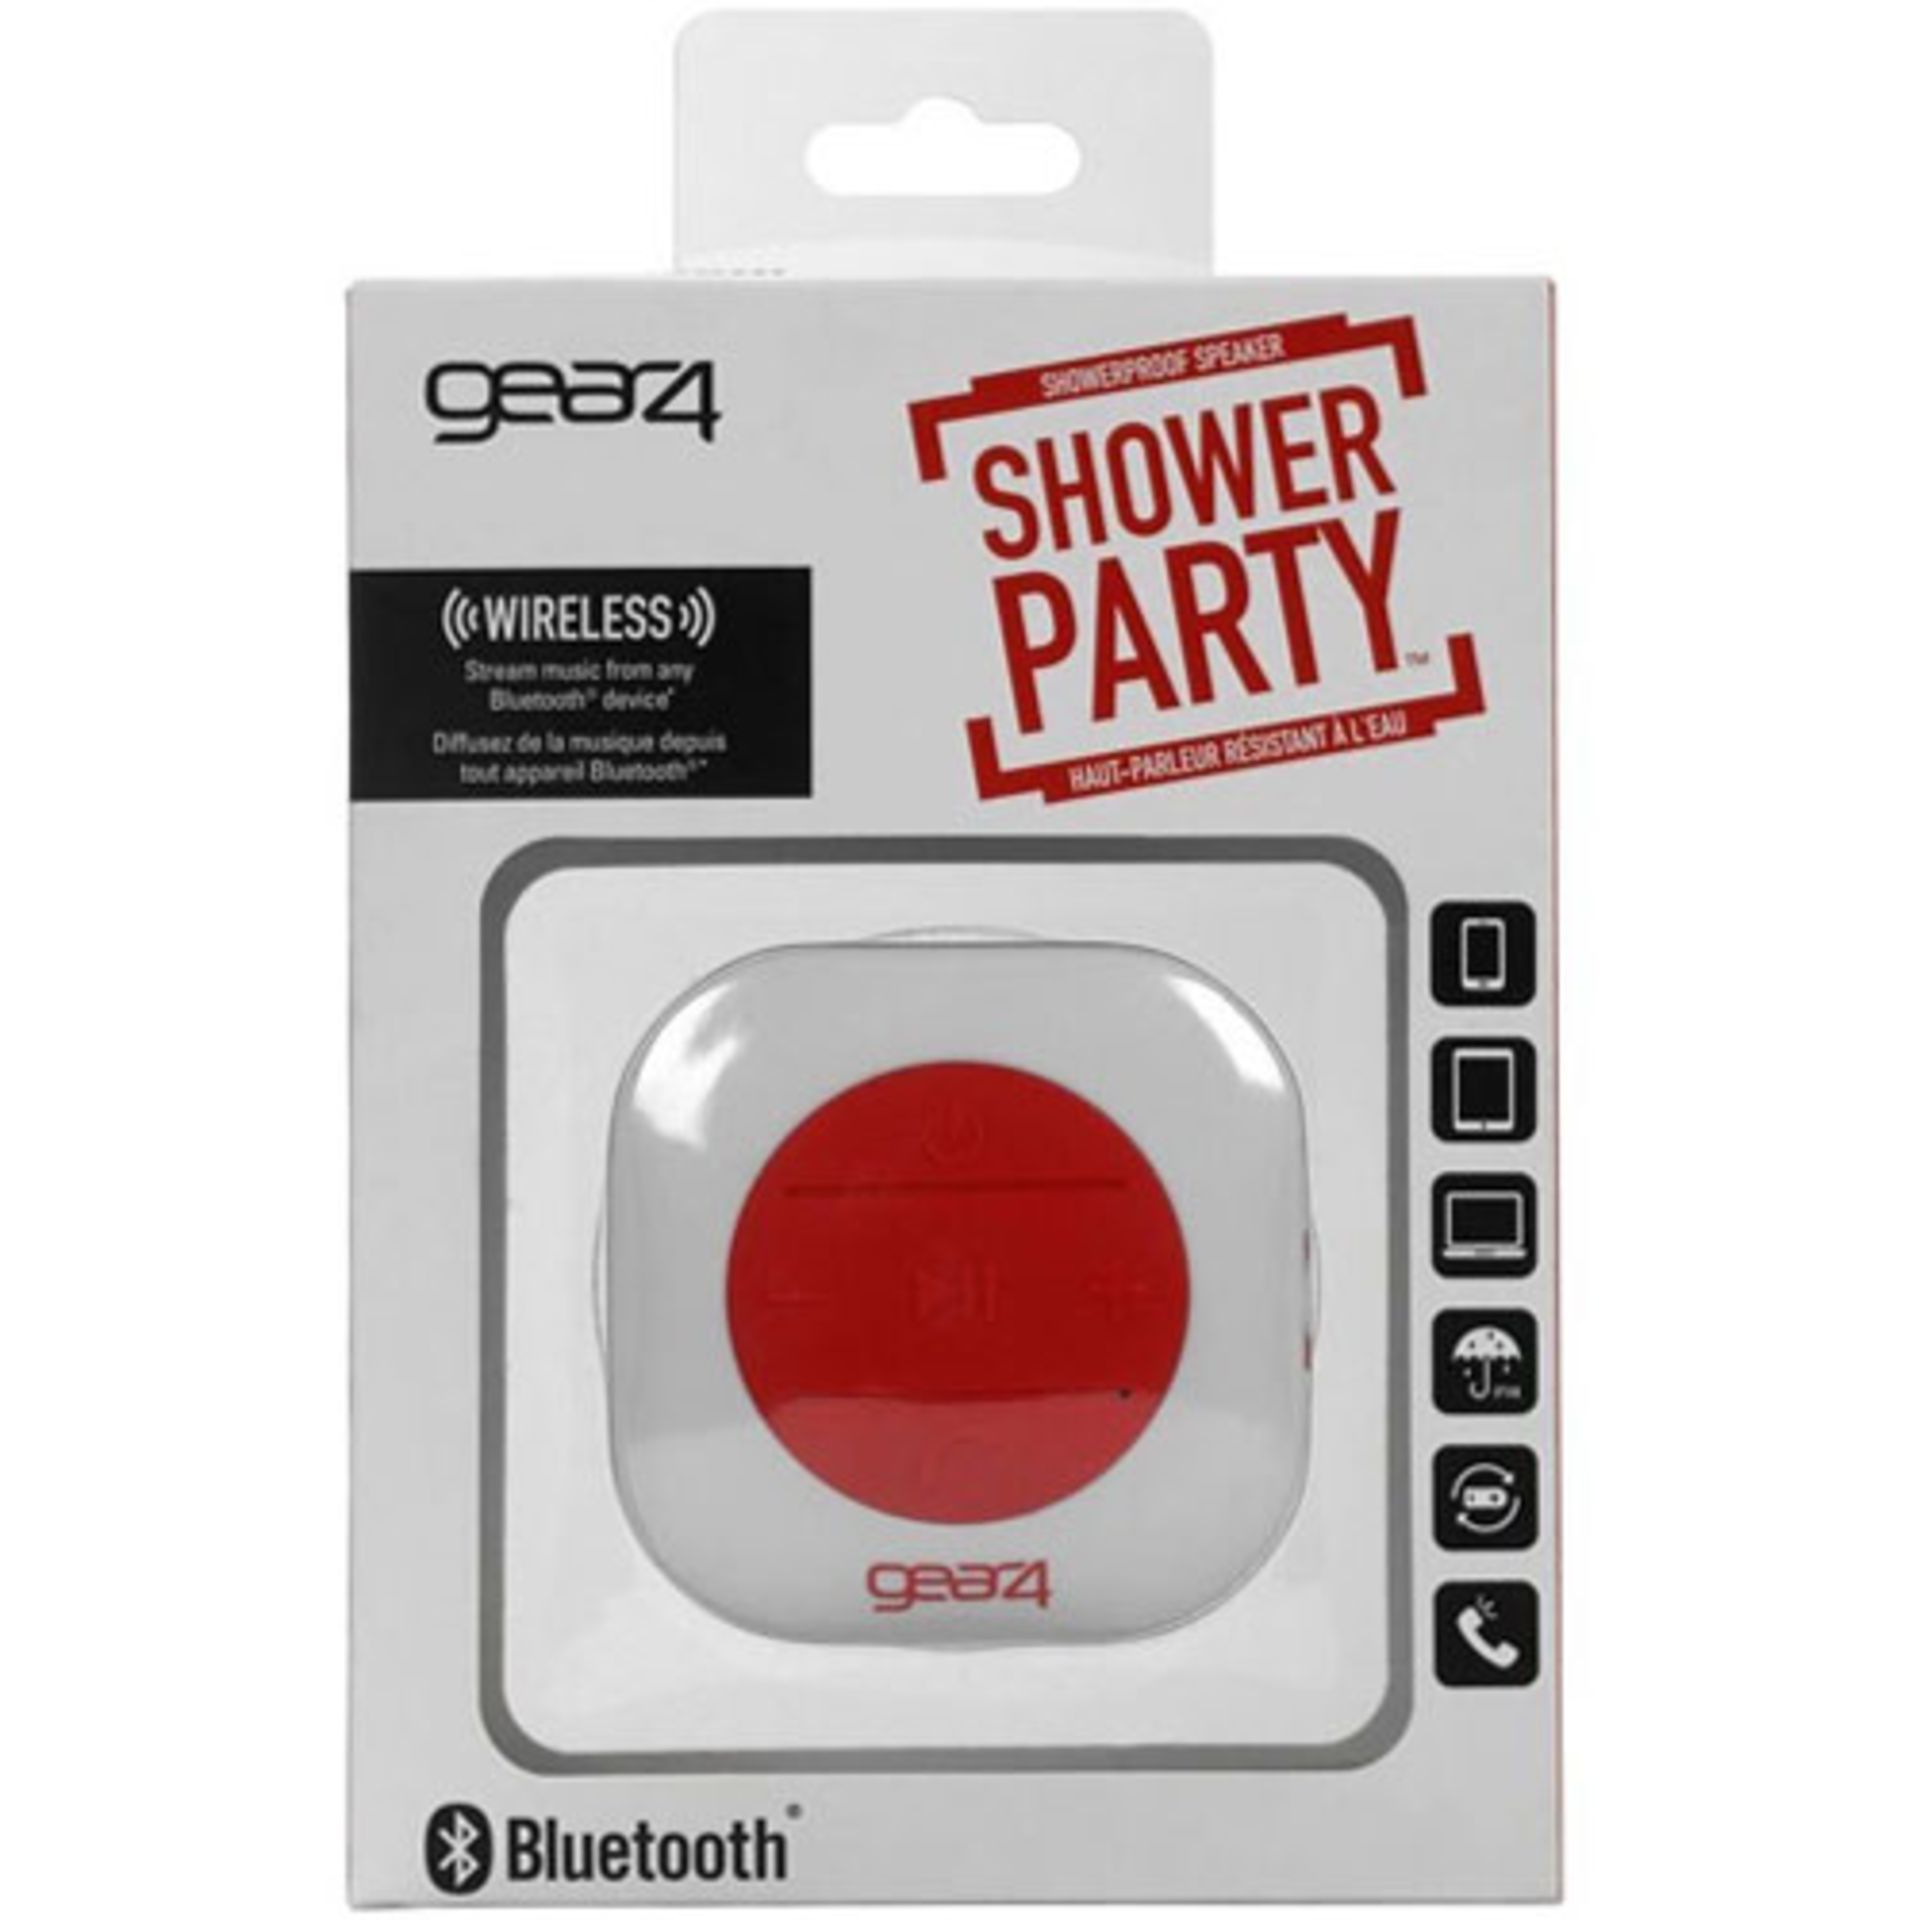 V *TRADE QTY* Brand New Gear4 Shower Party Wireless Speaker With Bluetooth - Showerproof - Play/ - Image 2 of 2